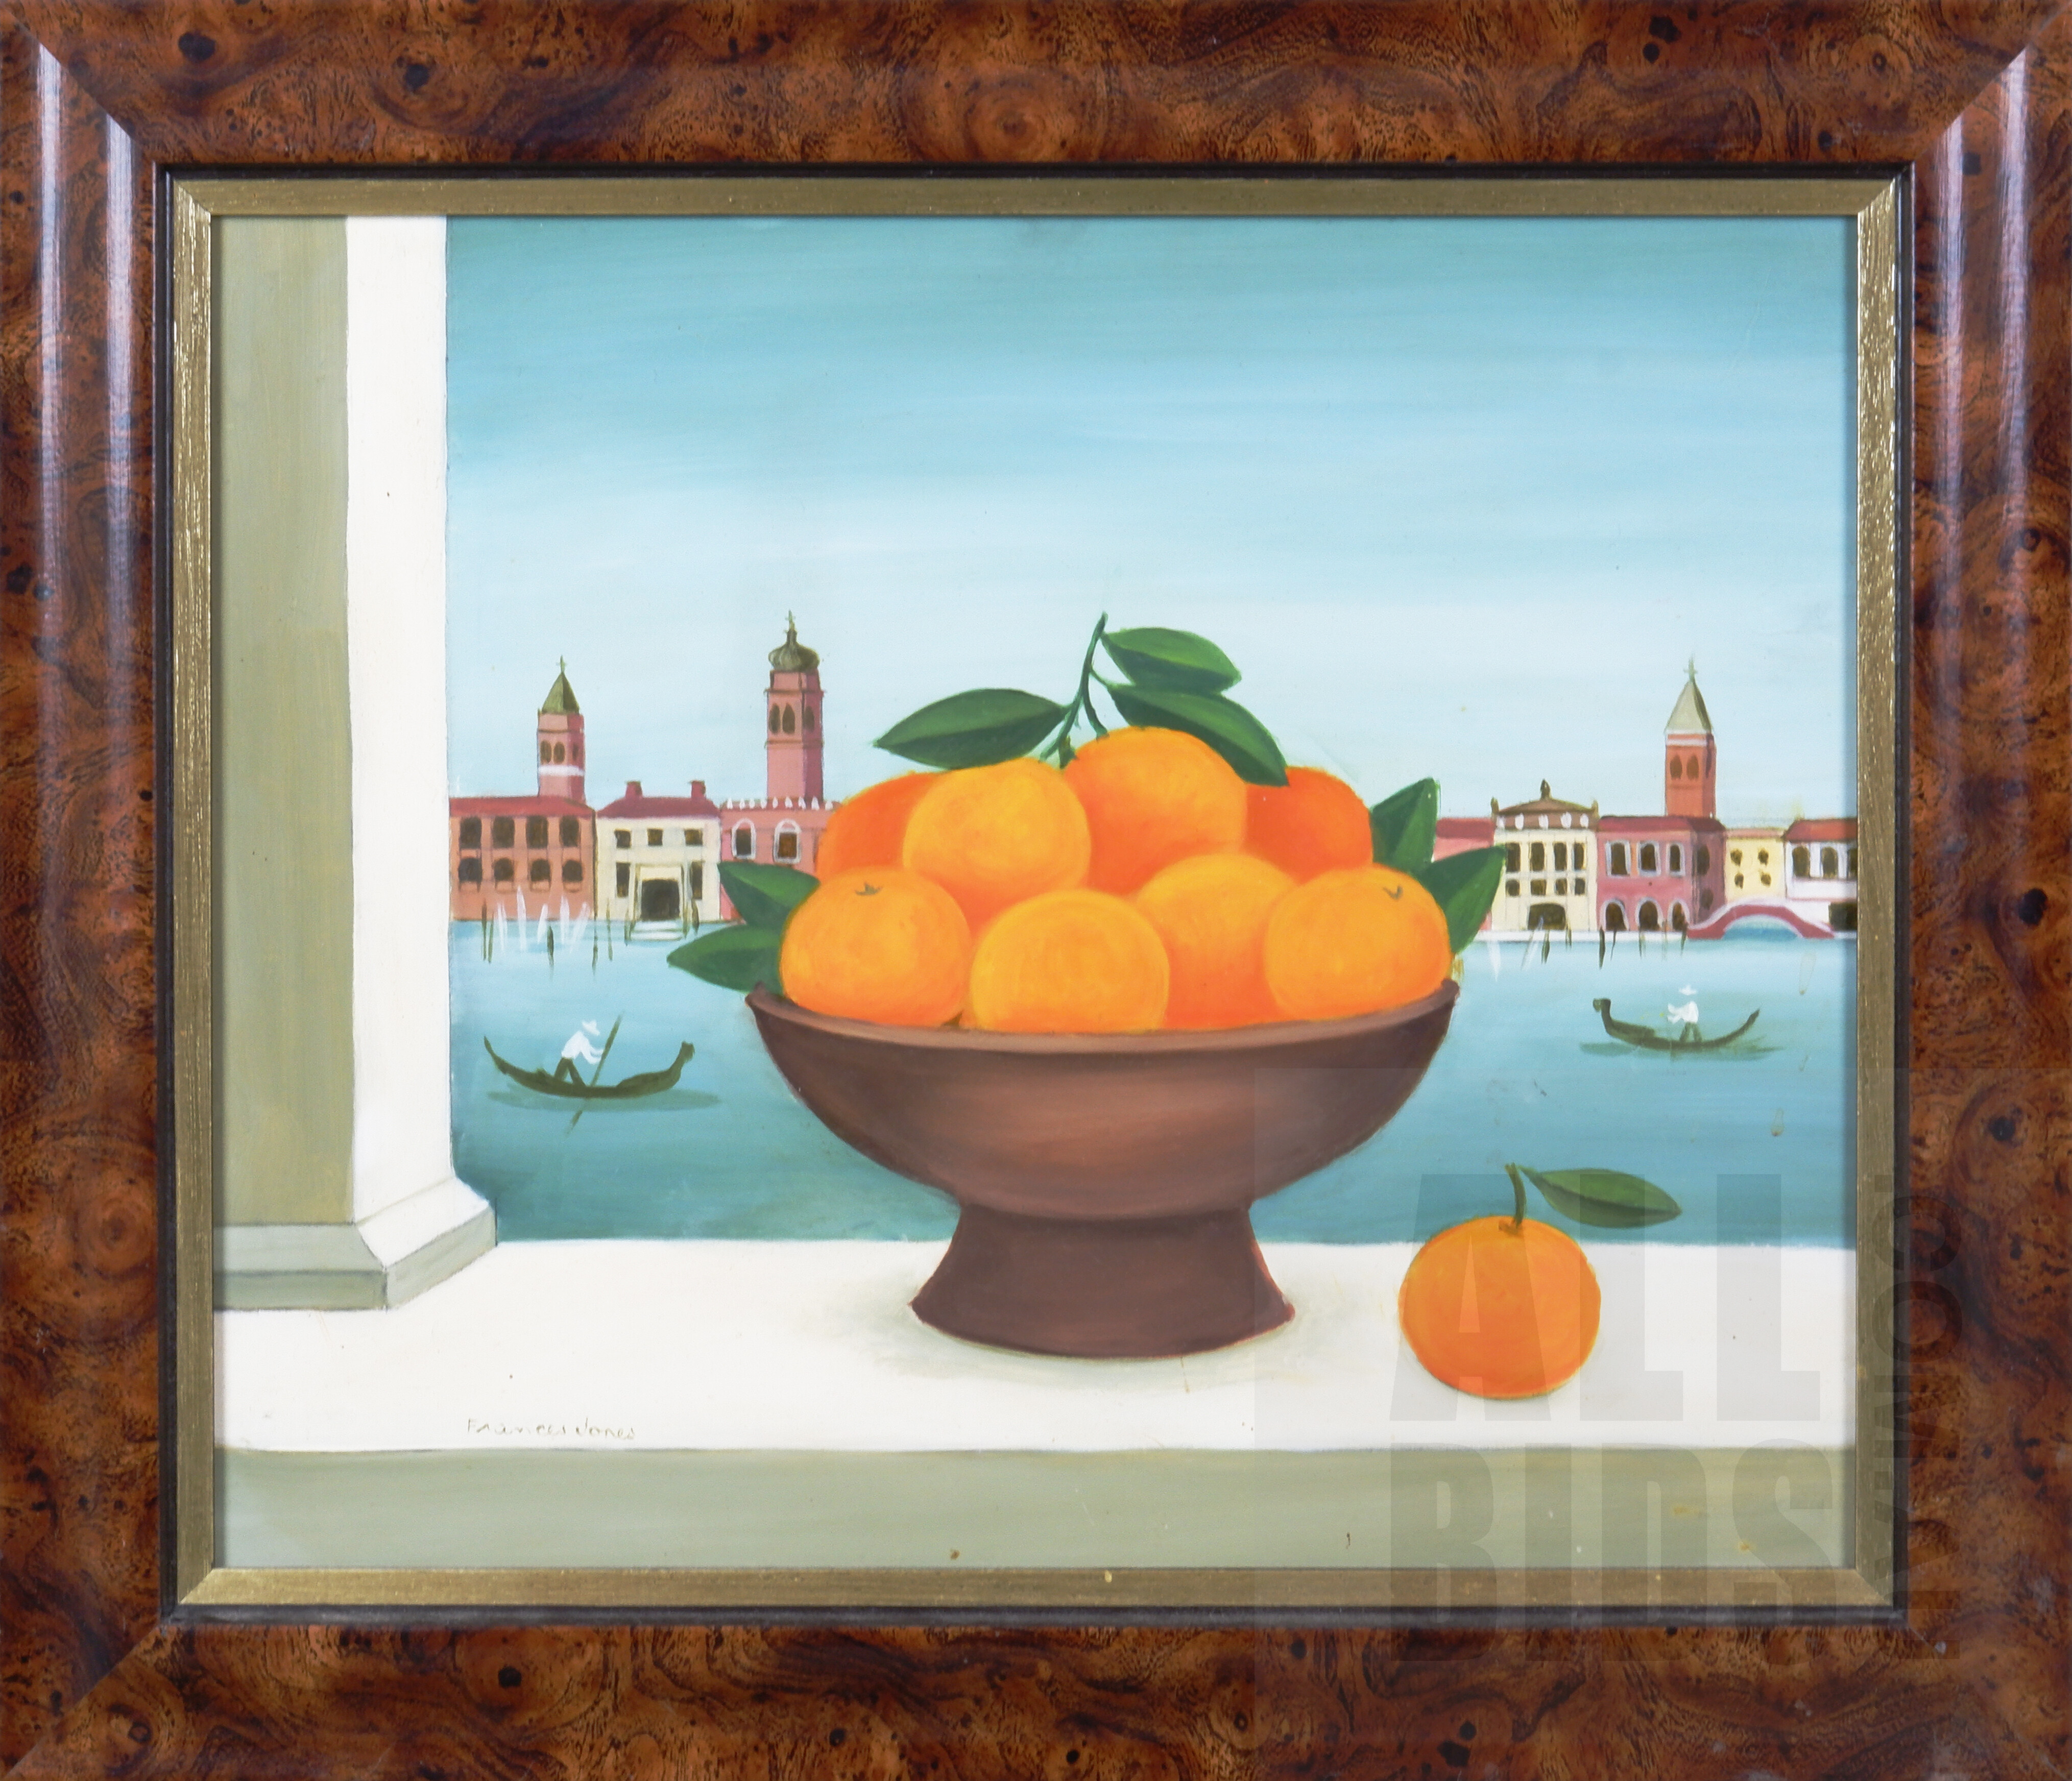 'Frances Jones (1923-1999), Oranges by the Canal, Oil on Board, 24 x 29.5 cm'